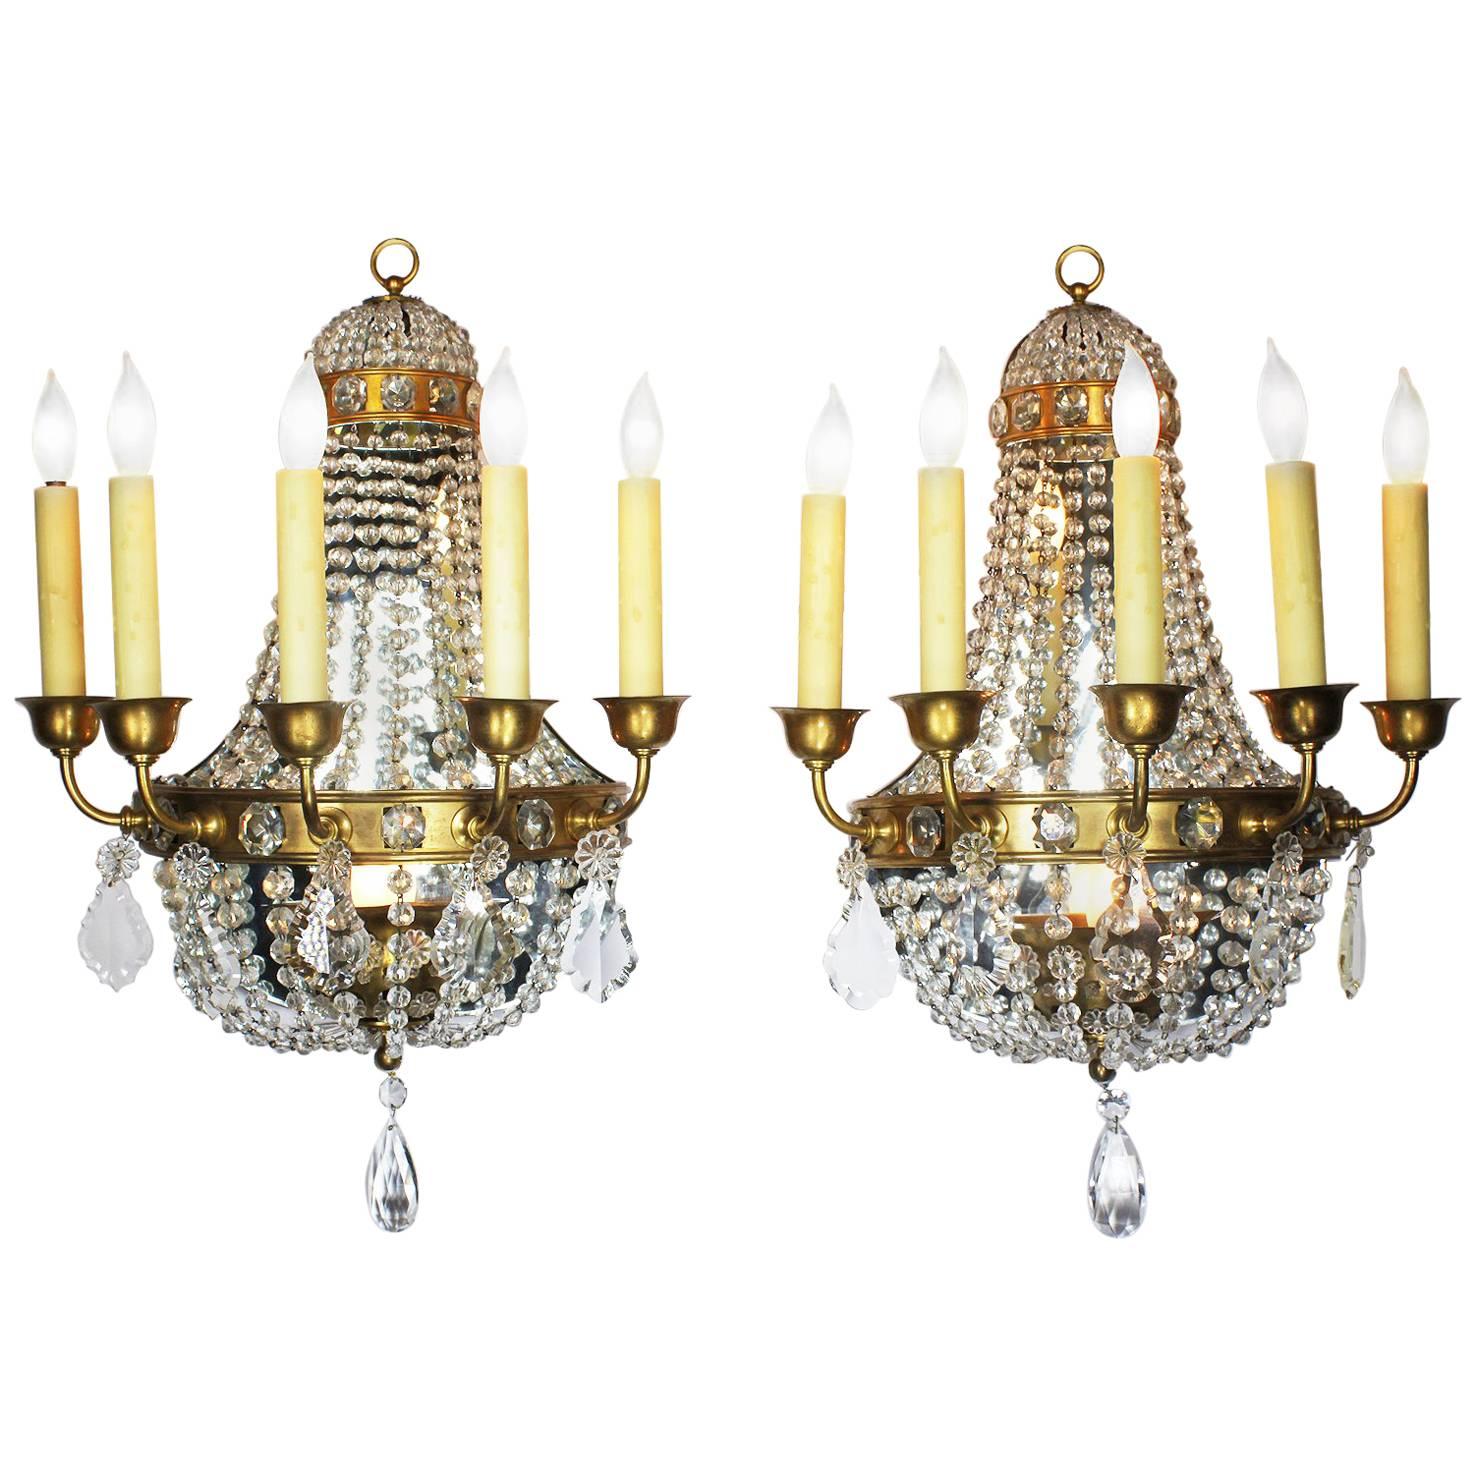 Pair of French Neoclassical Revival Louis XVI Style Cut-Glass Wall Sconces For Sale